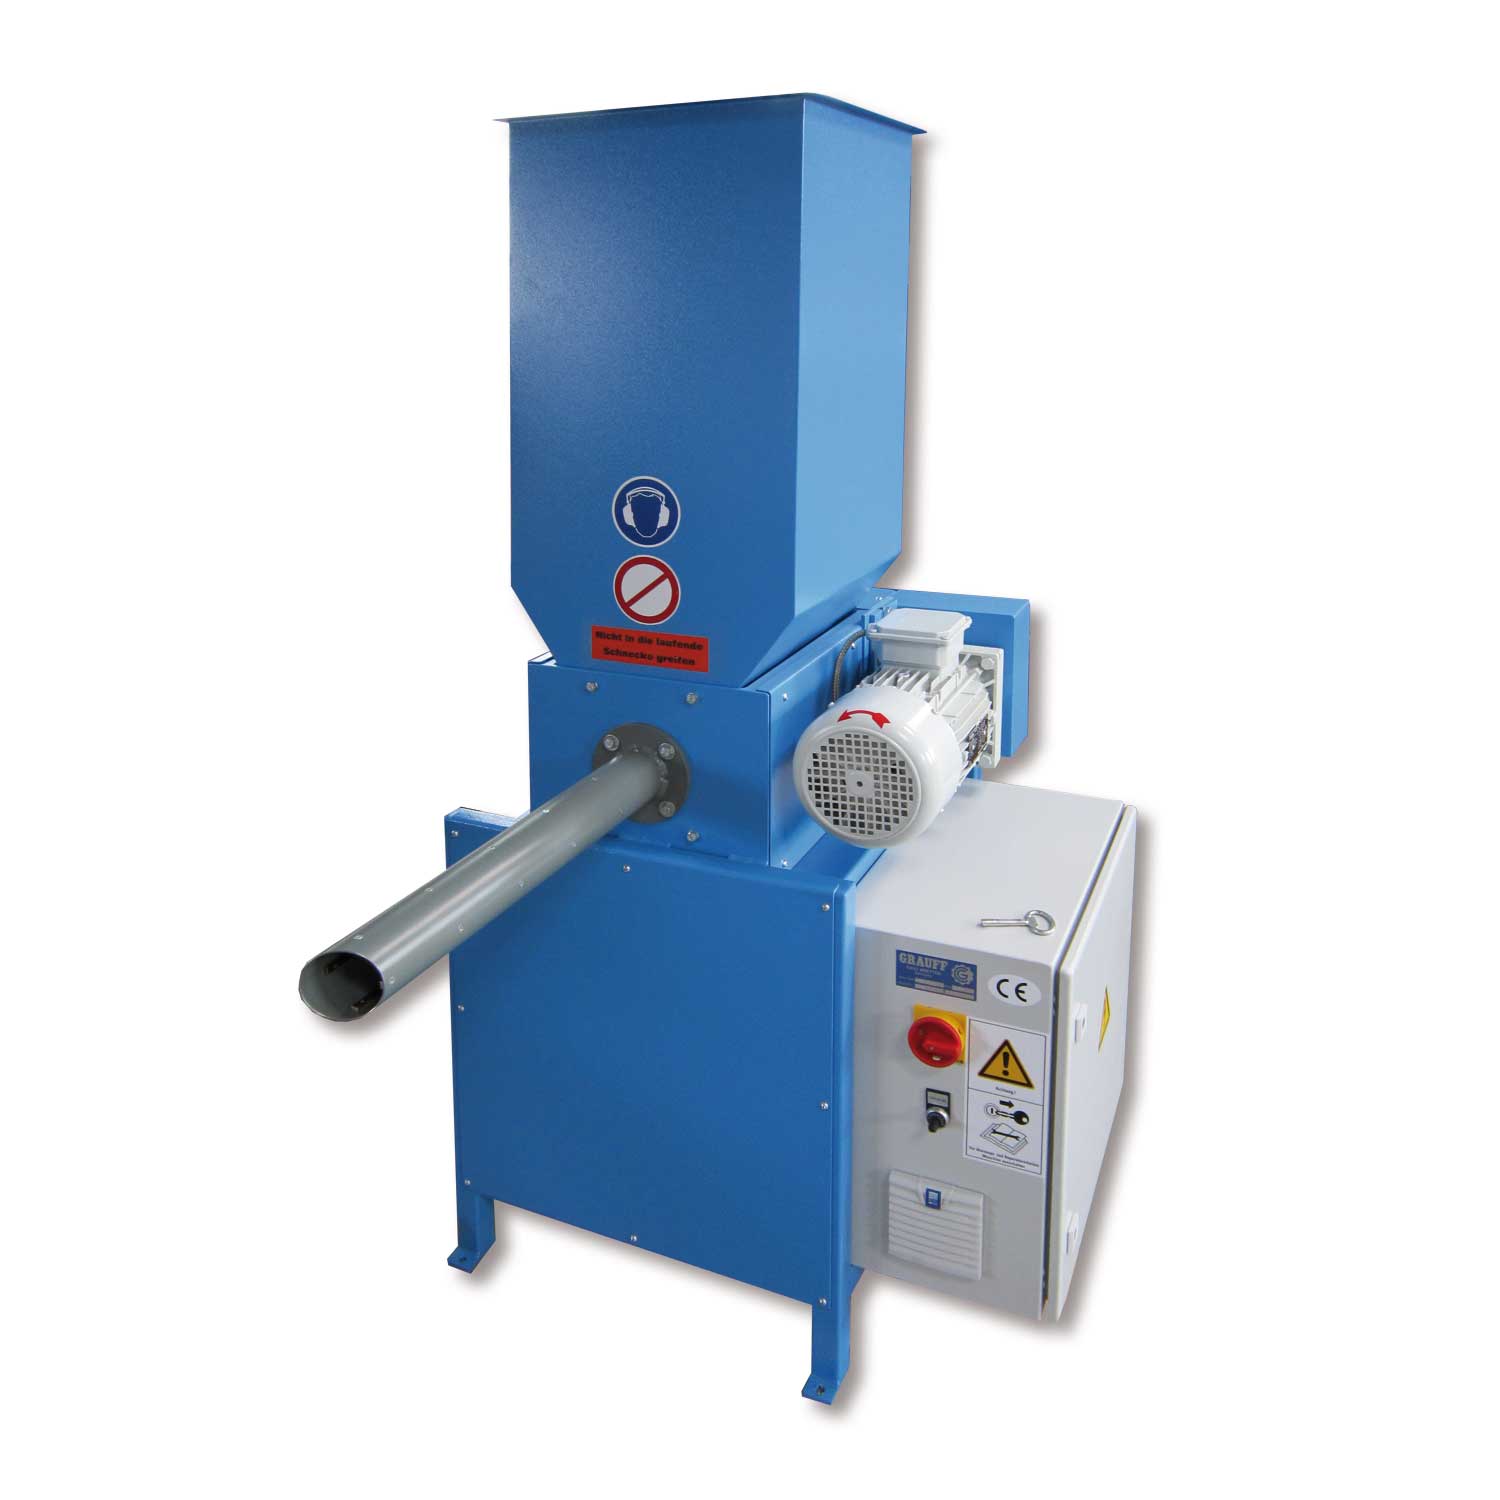 S Filling Machines Grauff, What Is The Best Sofa Filling Machine